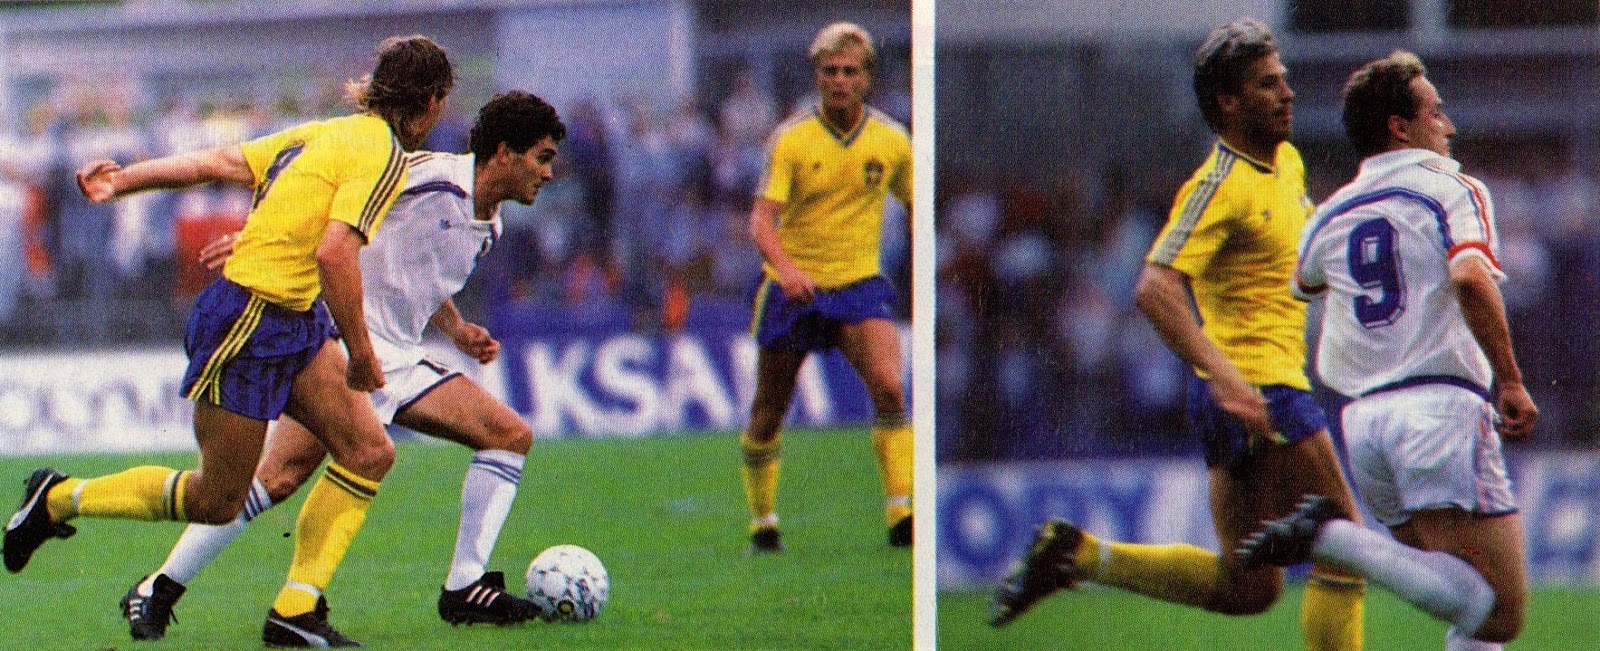 Malta and International Football Collection - October 1990: Unofficial  Friendly in Sicily US Palermo – Malta XI 2-2 - Saved by an Injury time Bużu  Goal - Palermo hit the Post Three